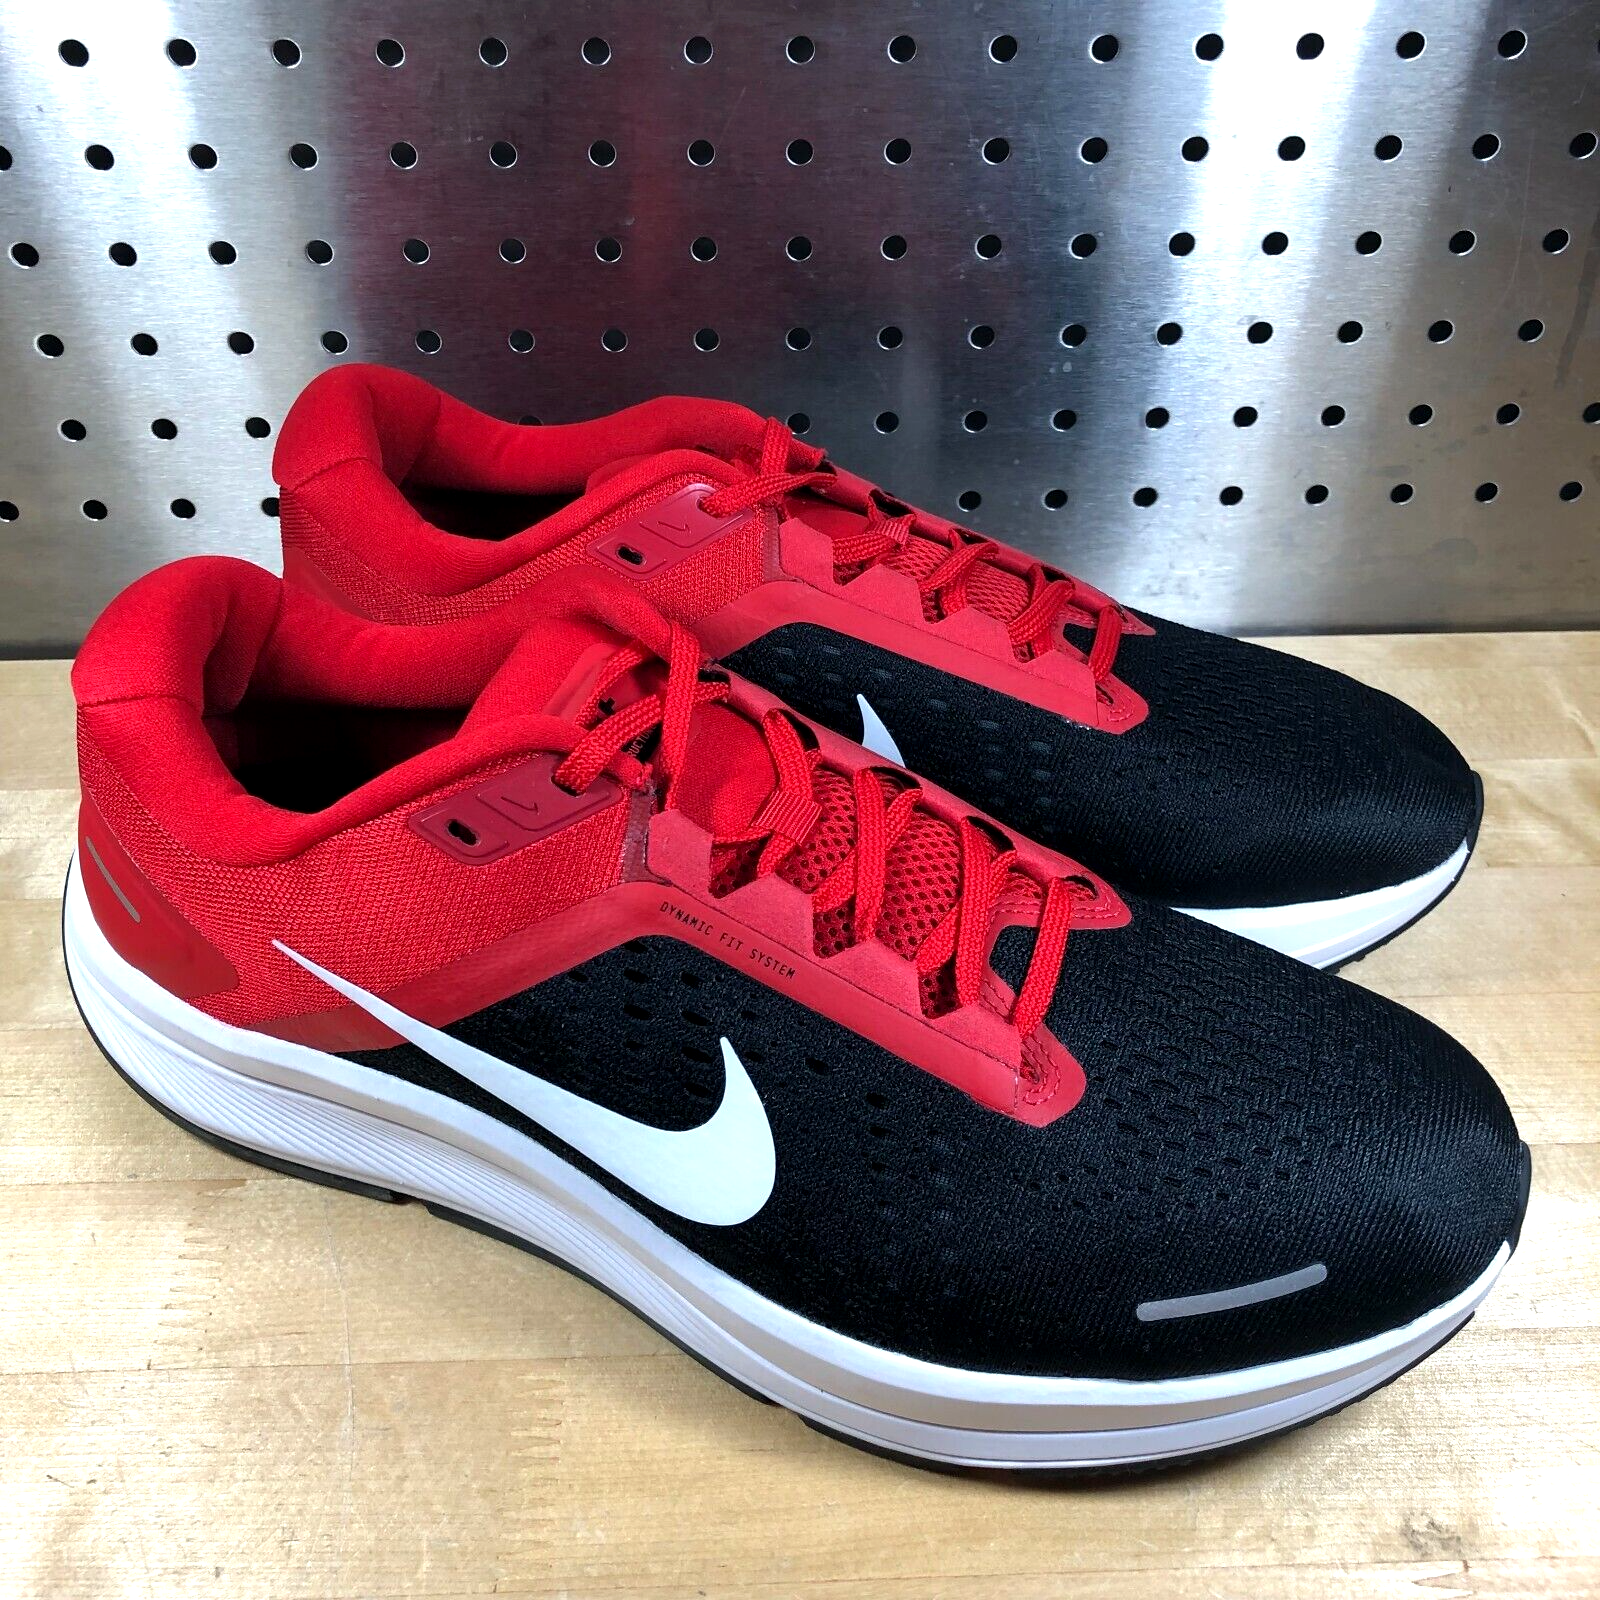 New Nike Air Zoom Structure 23 University Red Black CZ6720-008 Men's Size 10